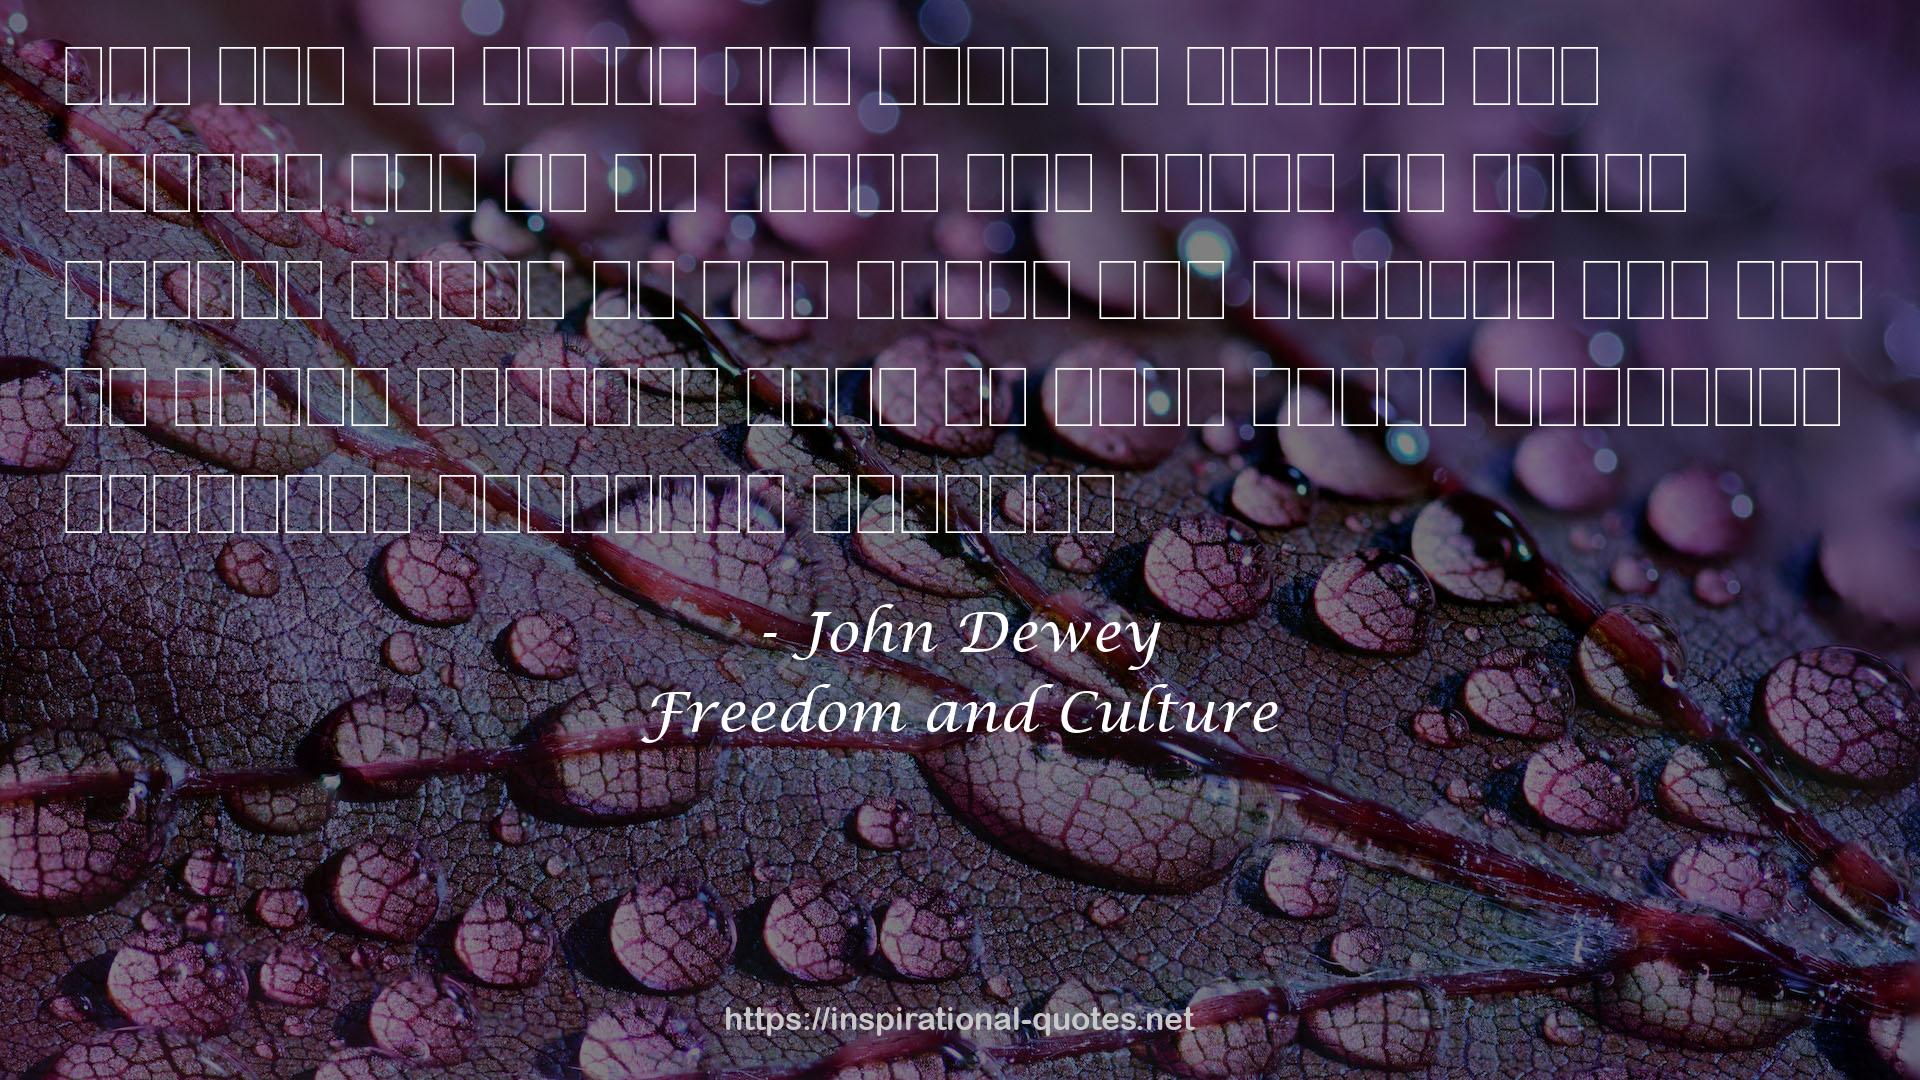 Freedom and Culture QUOTES